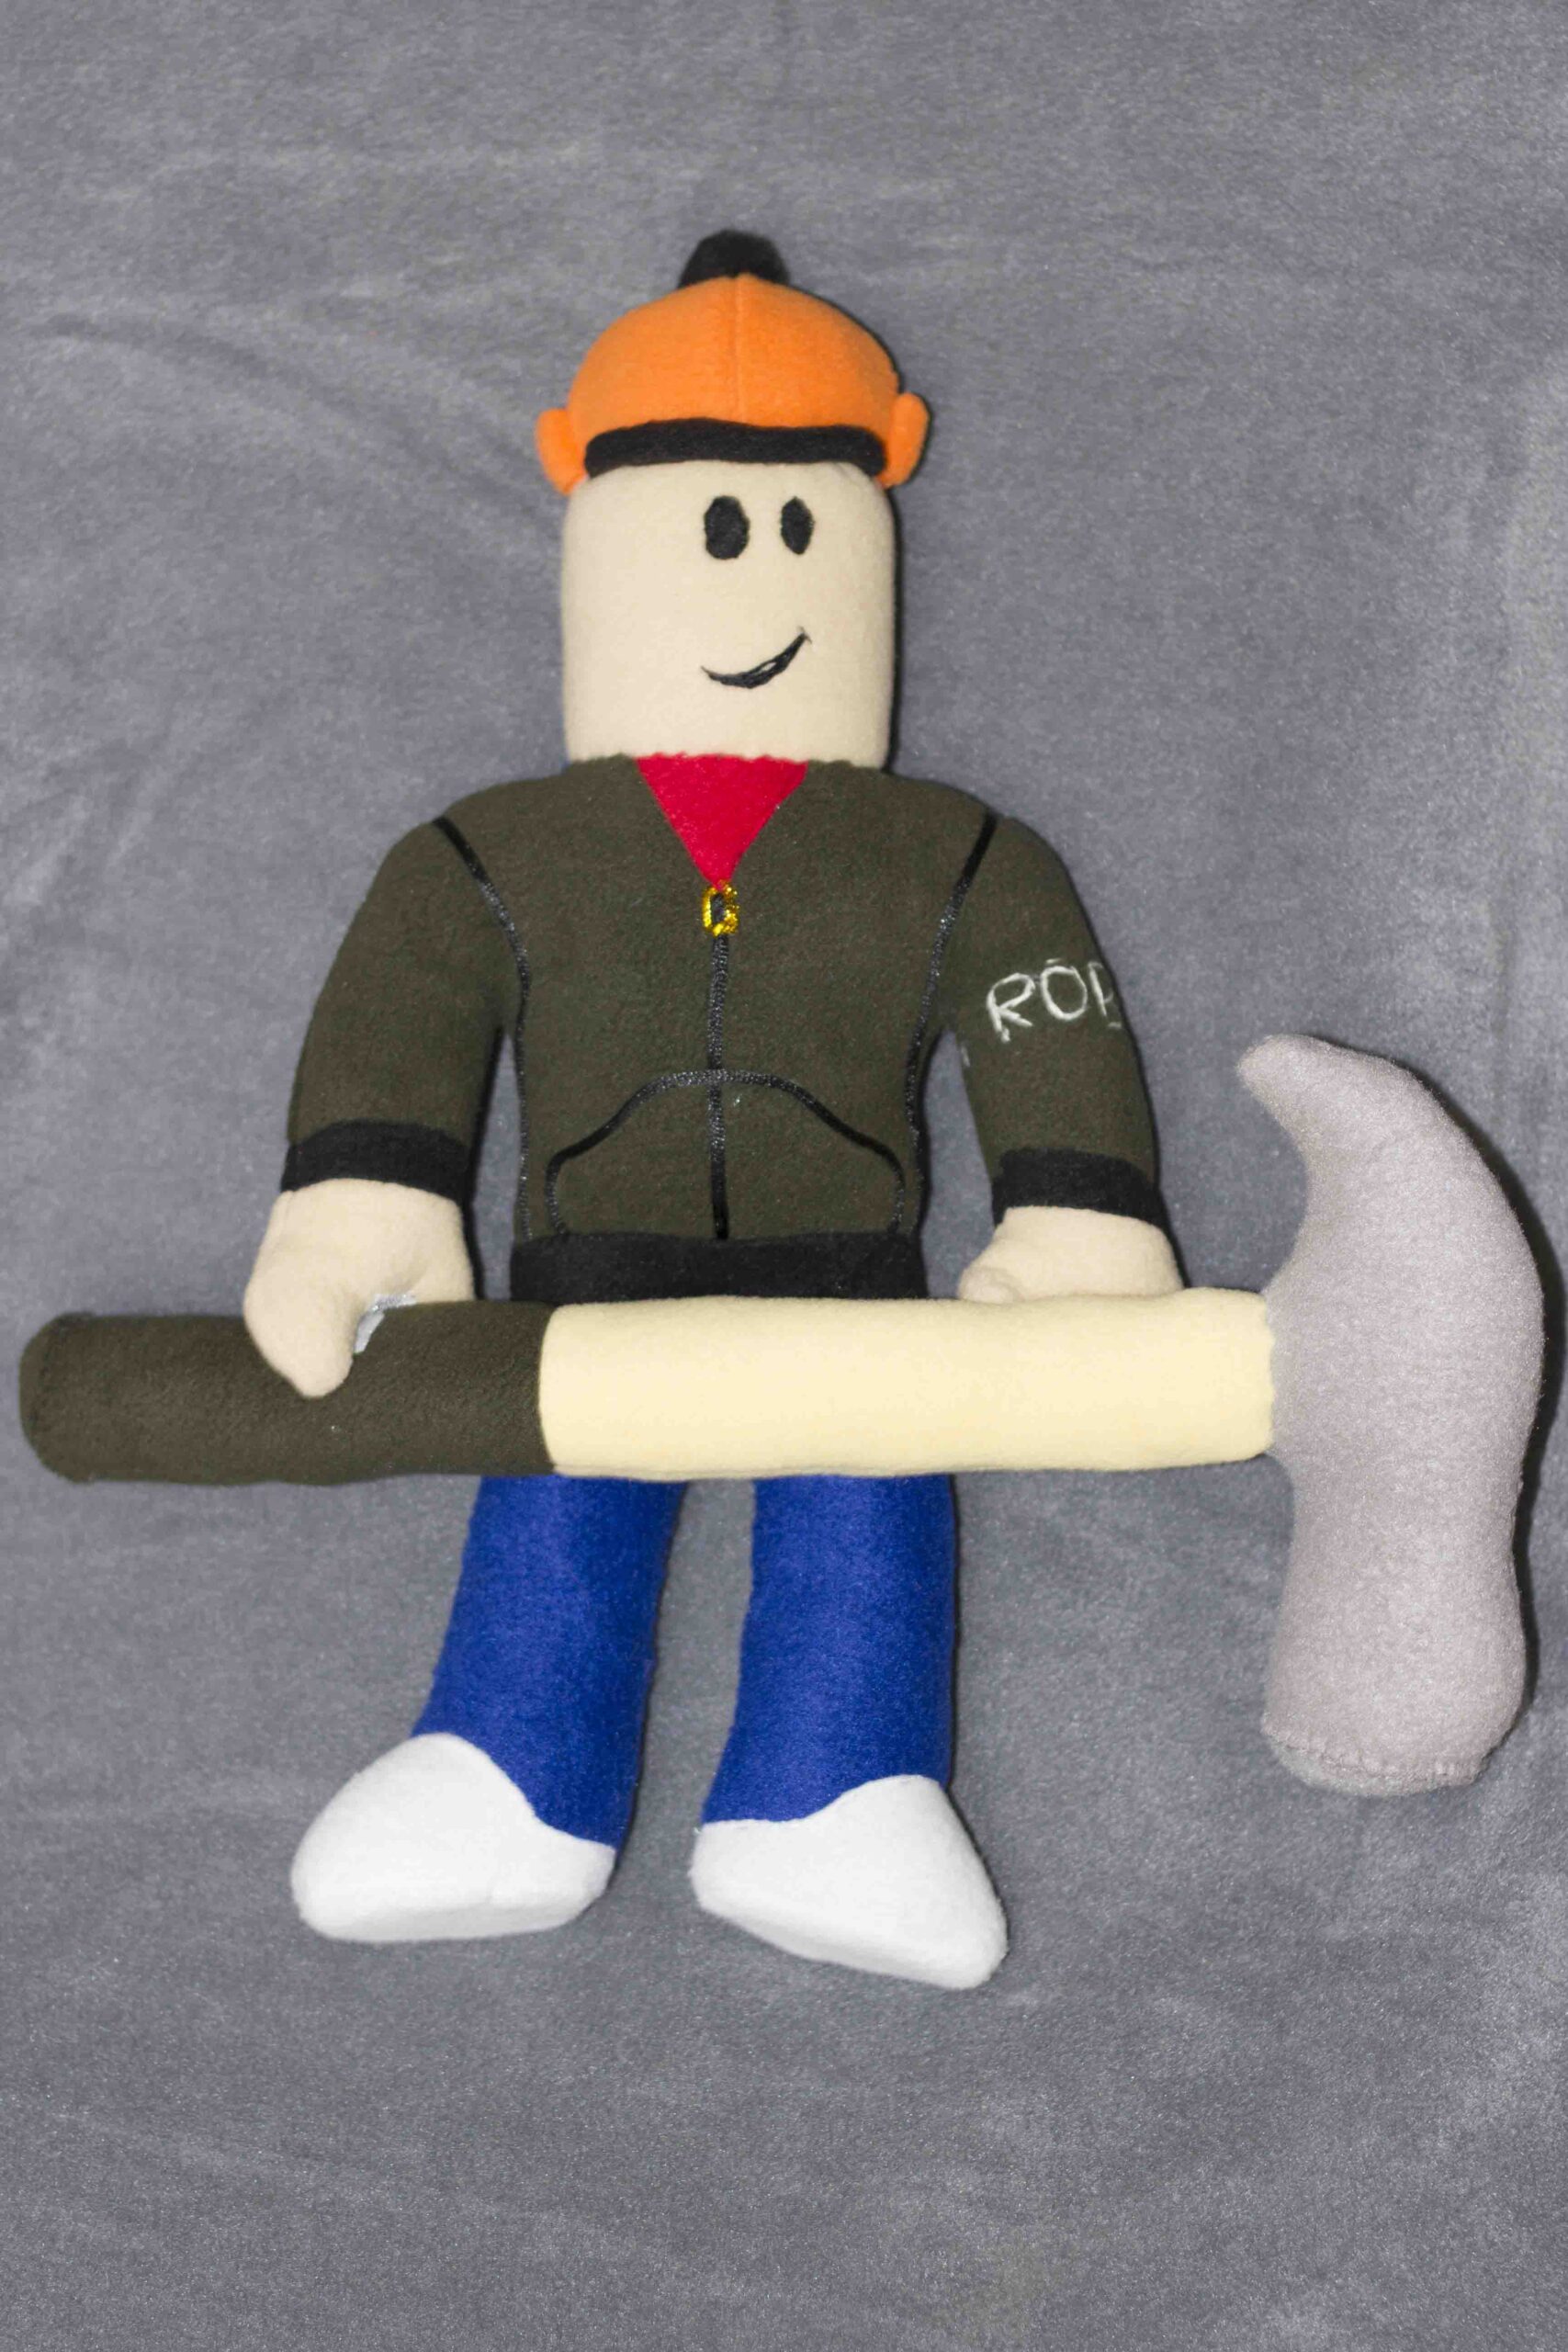 I made Builderman's avatar in Roblox! 